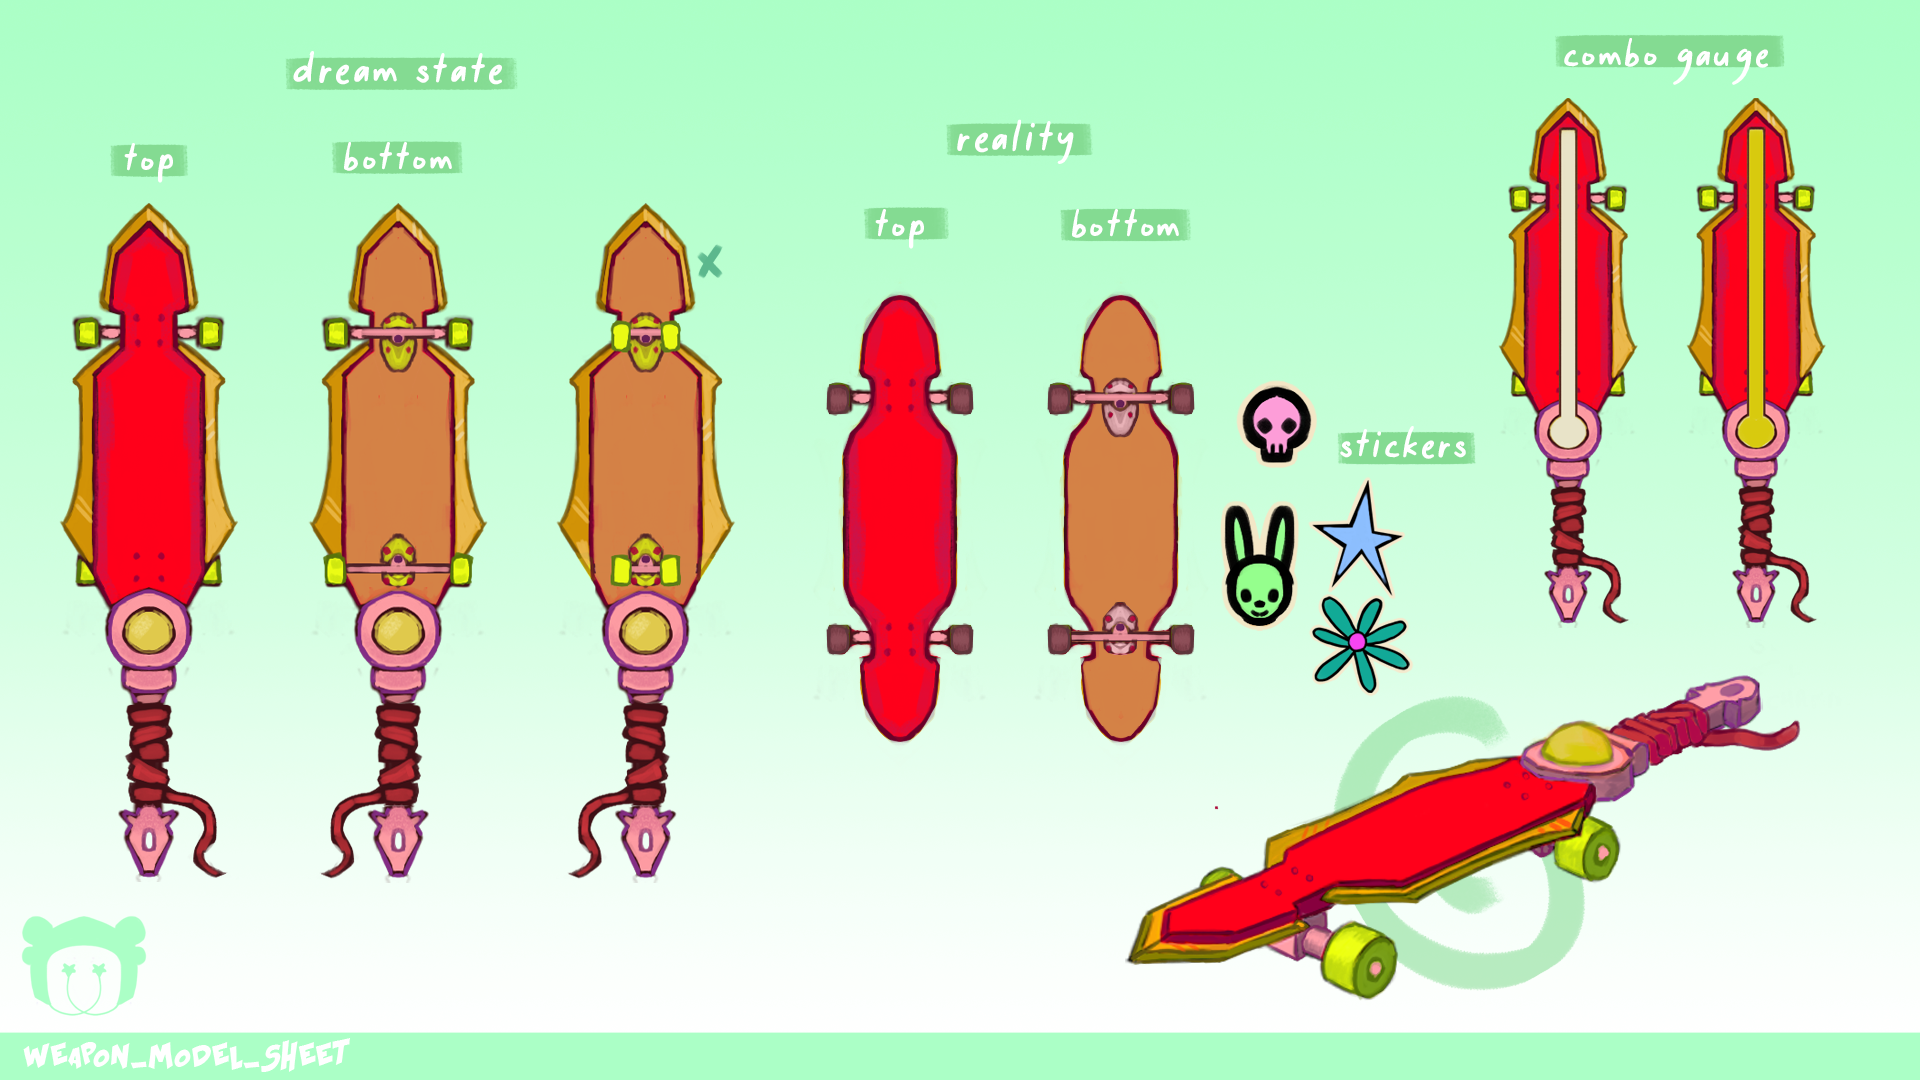 Model Sheet by Zel Hallam, depicting the final designs of a makeshift skateboard sword. As well as, sticker concepts and a combo gauge concept.